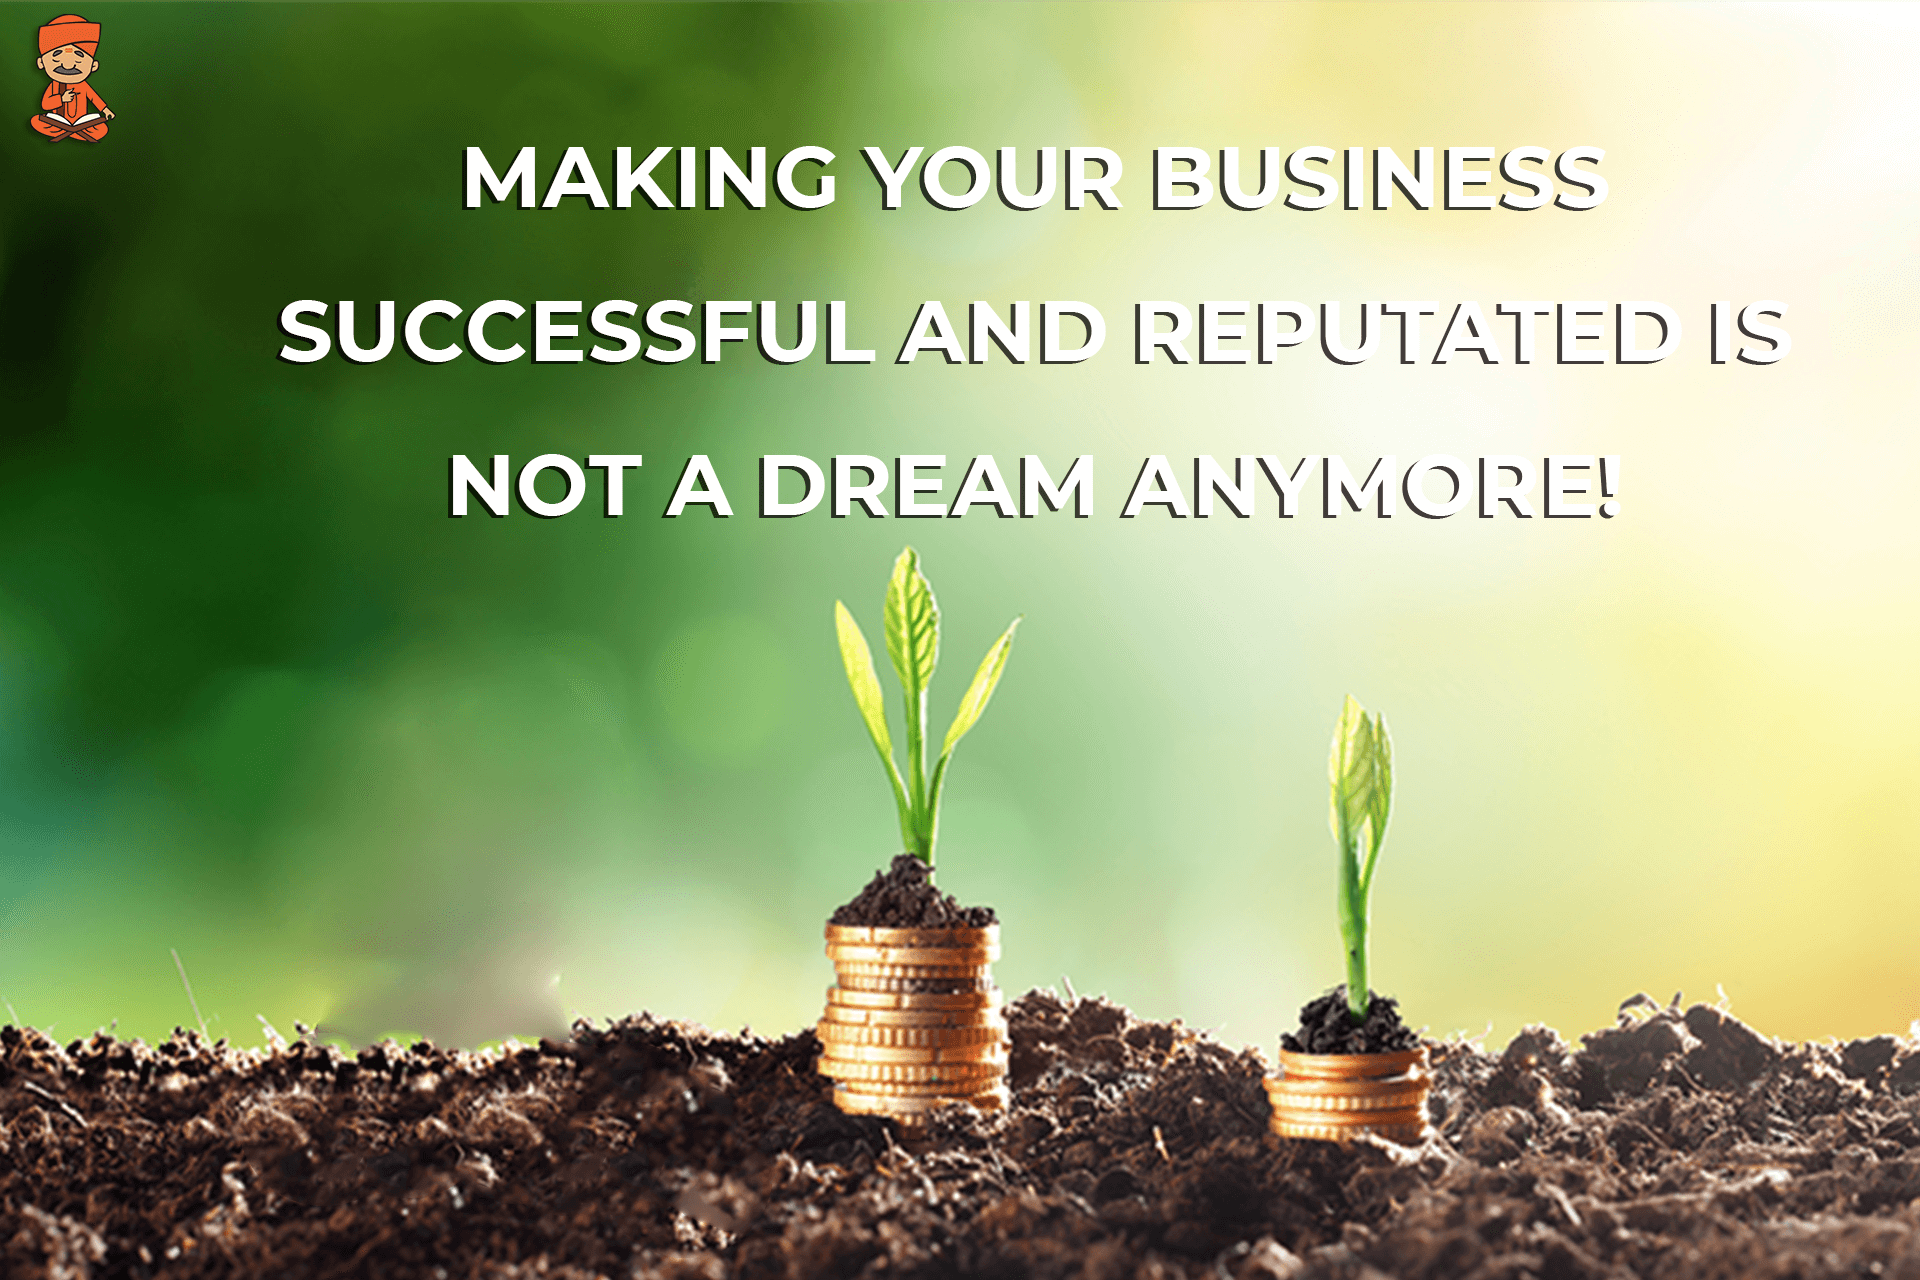 Making Your Business Successful And Reputated Is Not A Dream Anymore!